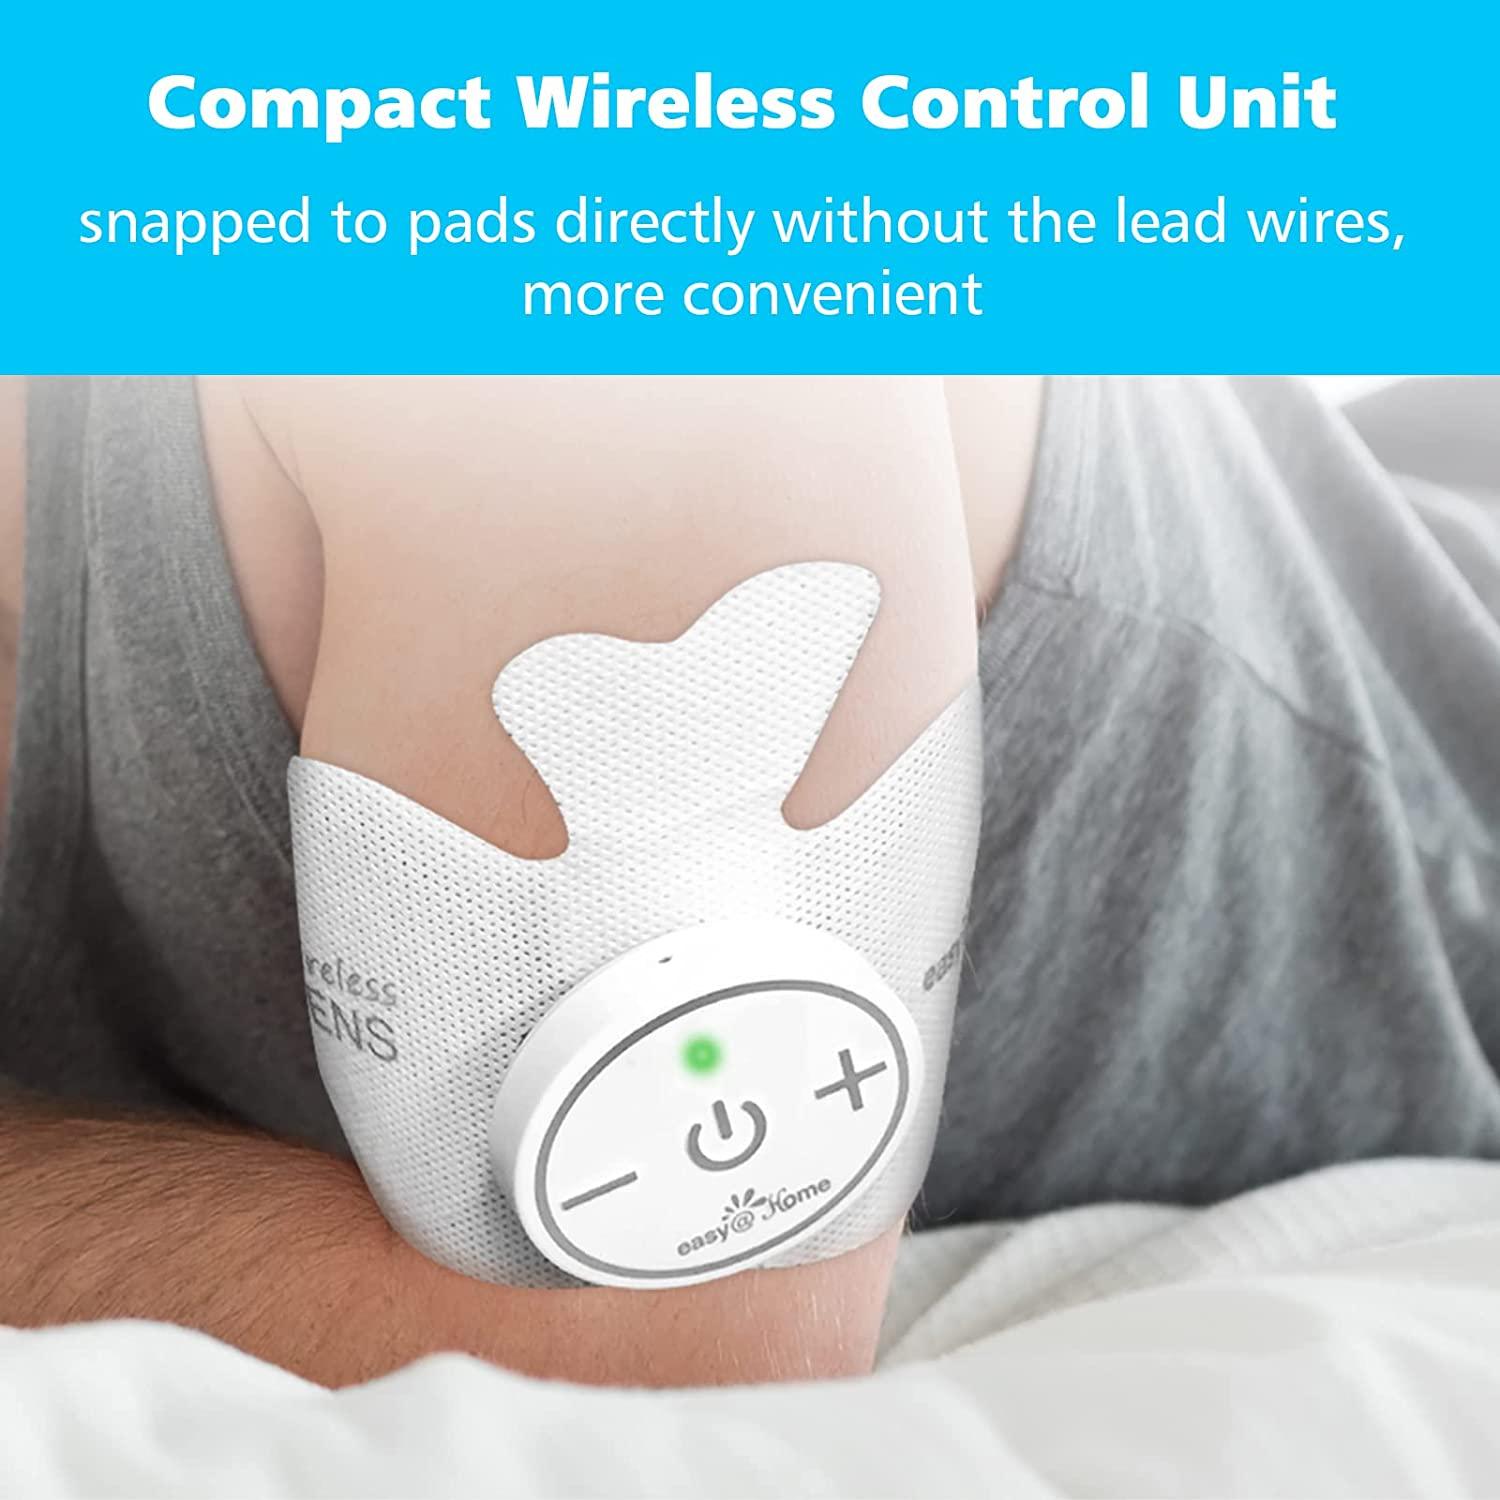 Easy@Home Rechargeable Compact Wireless Tens Unit - 510K Cleared FSA Eligible Electric EMS Muscle Stimulator Pain Relief Therapy Portable Pain